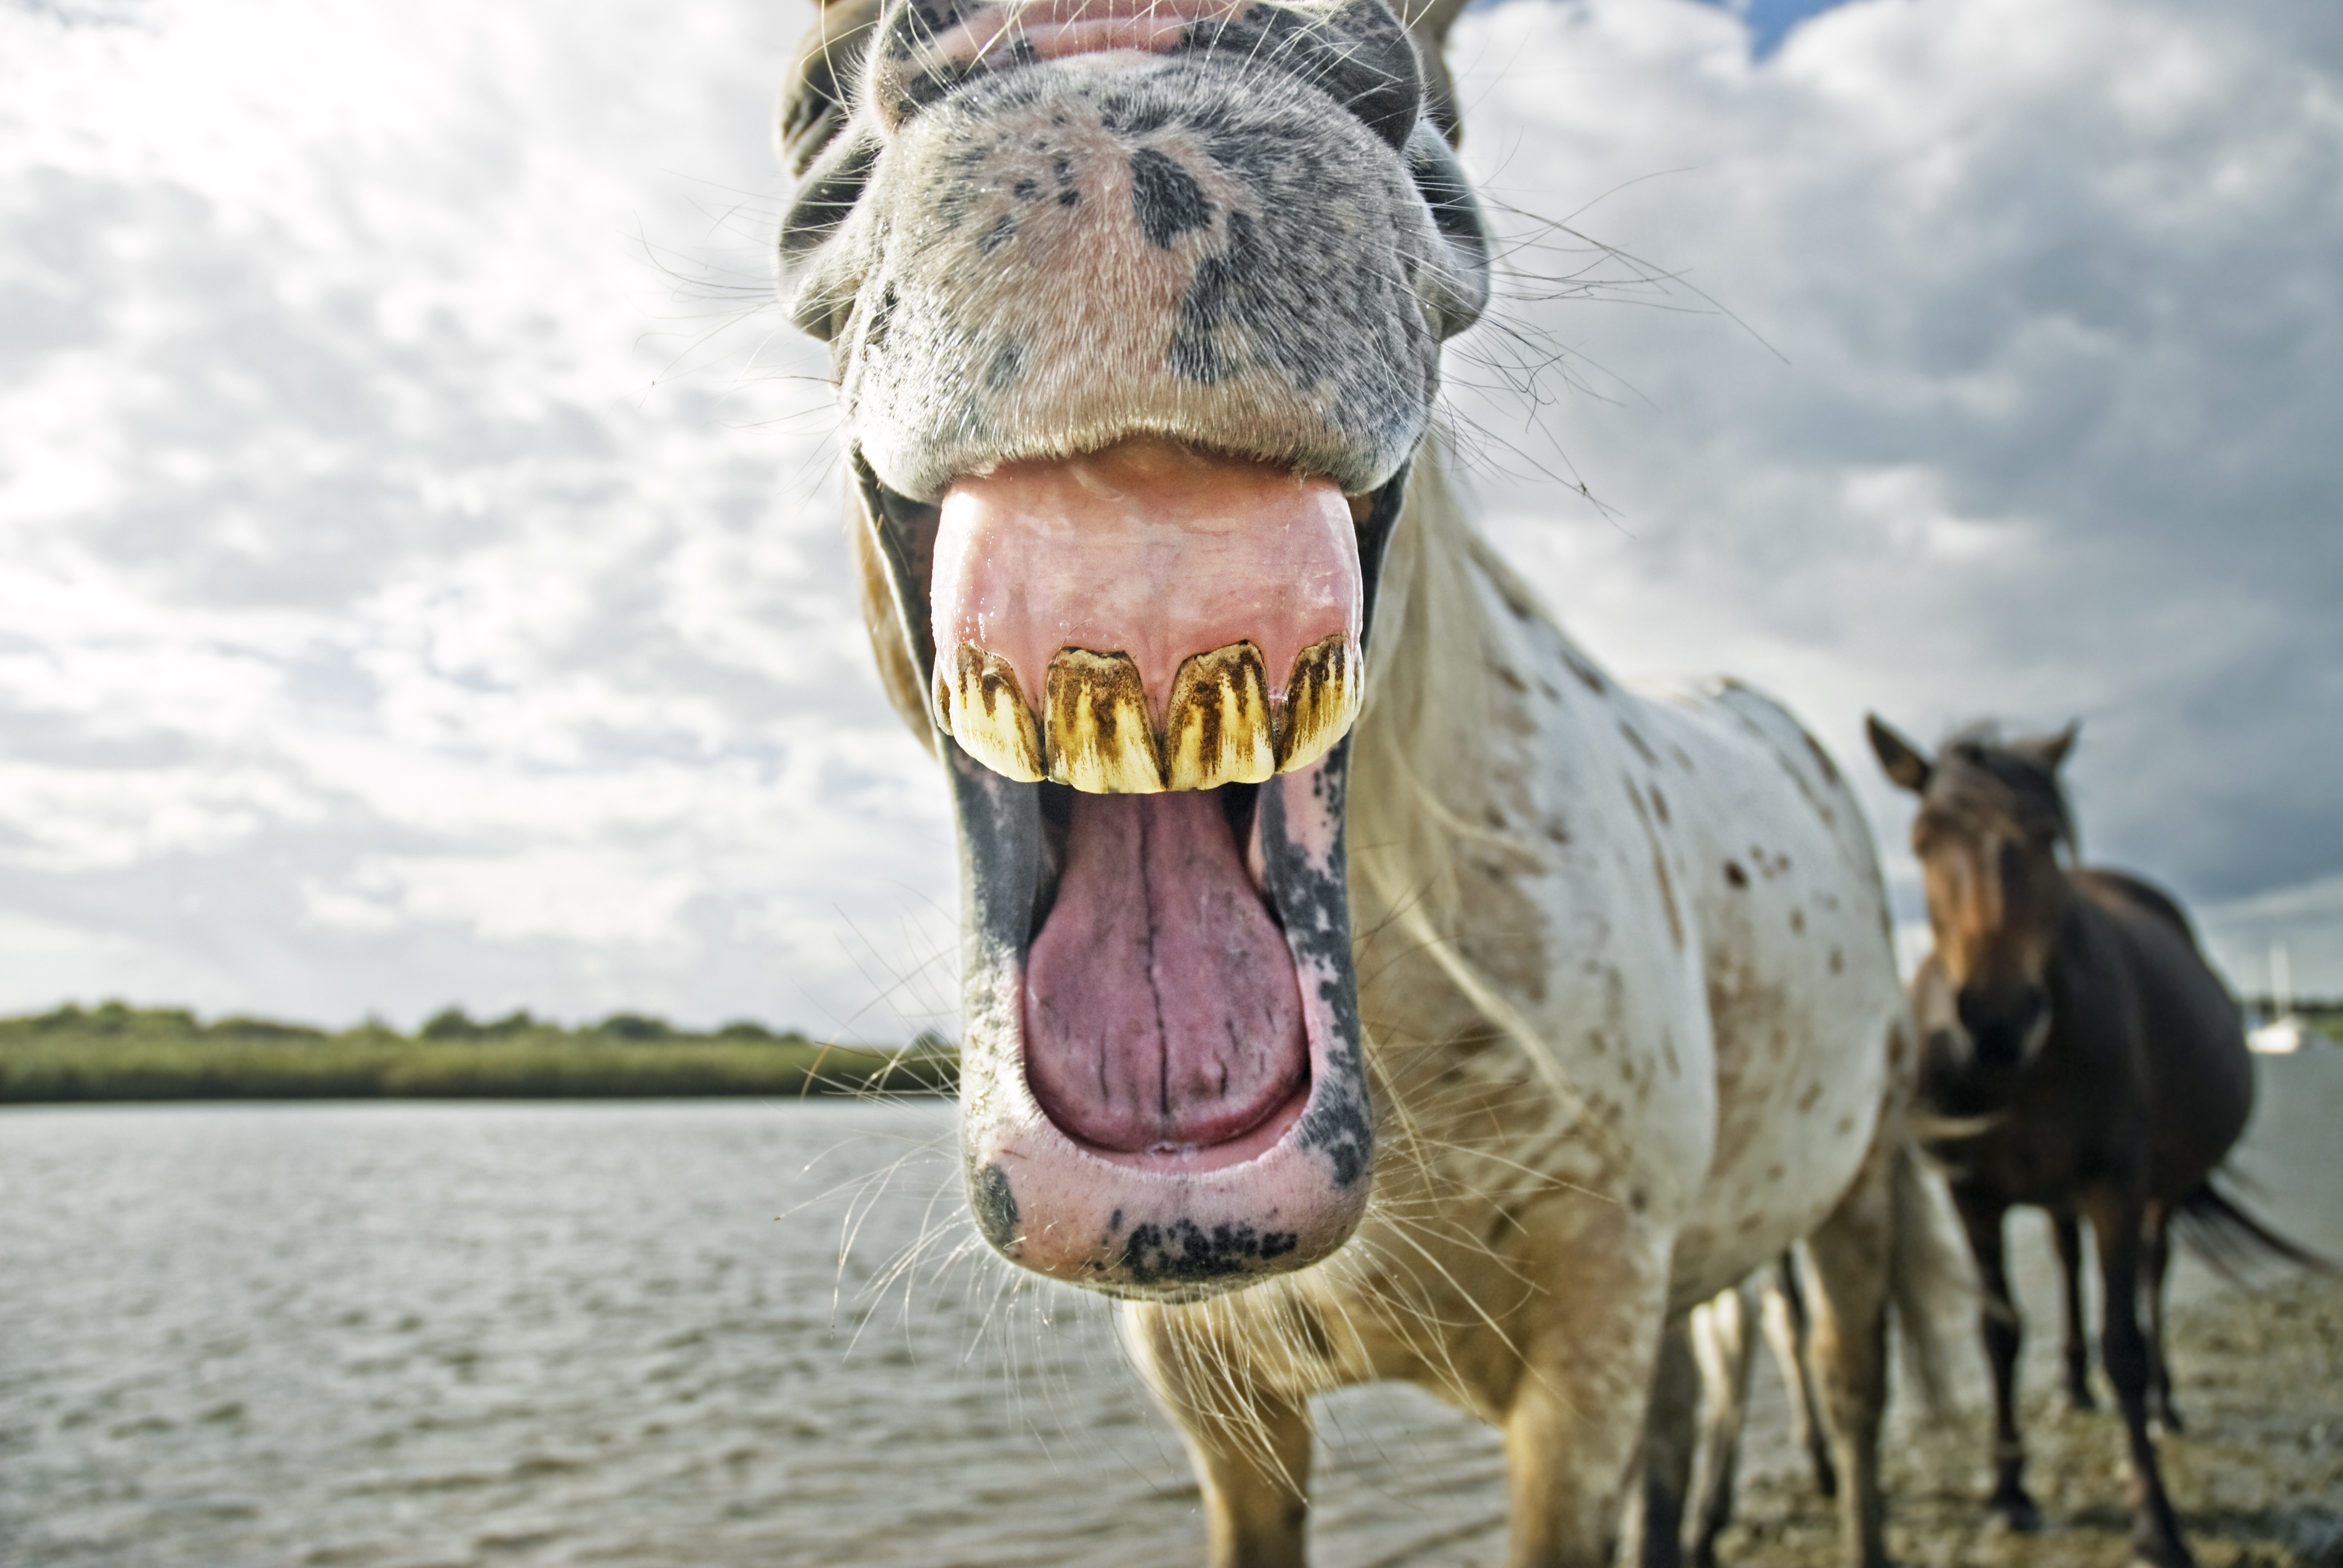 A horse yawning, showing his teeth and gums 